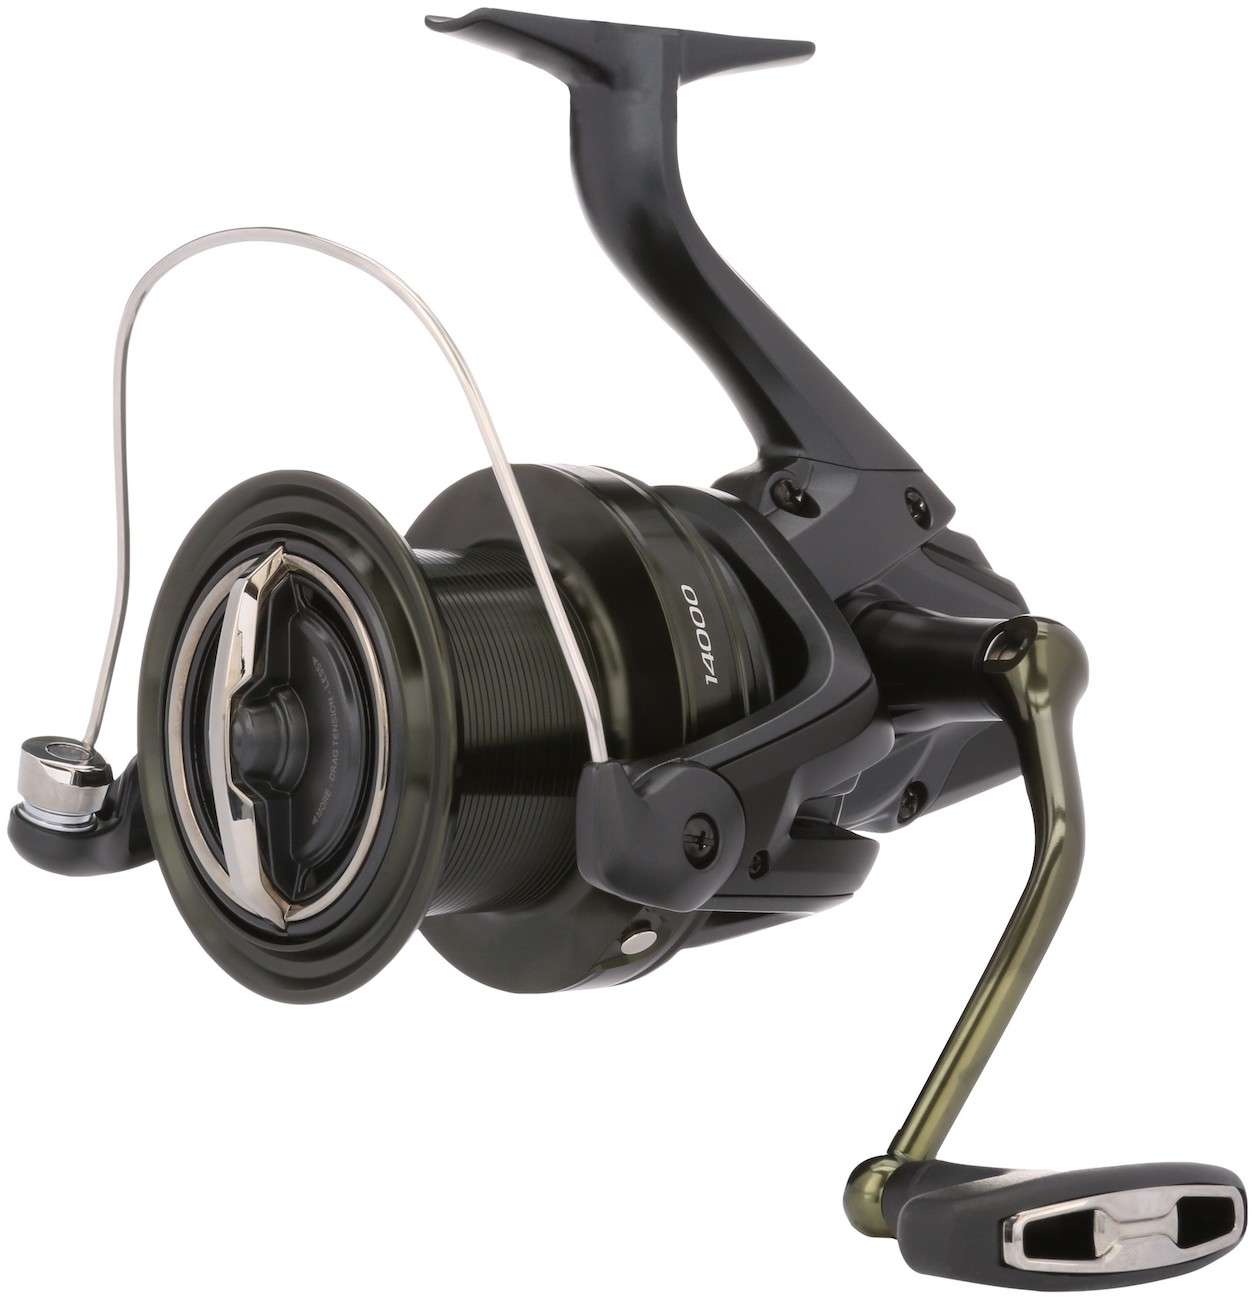 Cost Effective Heavy Duty Spinning Reel is out from SHIMANO